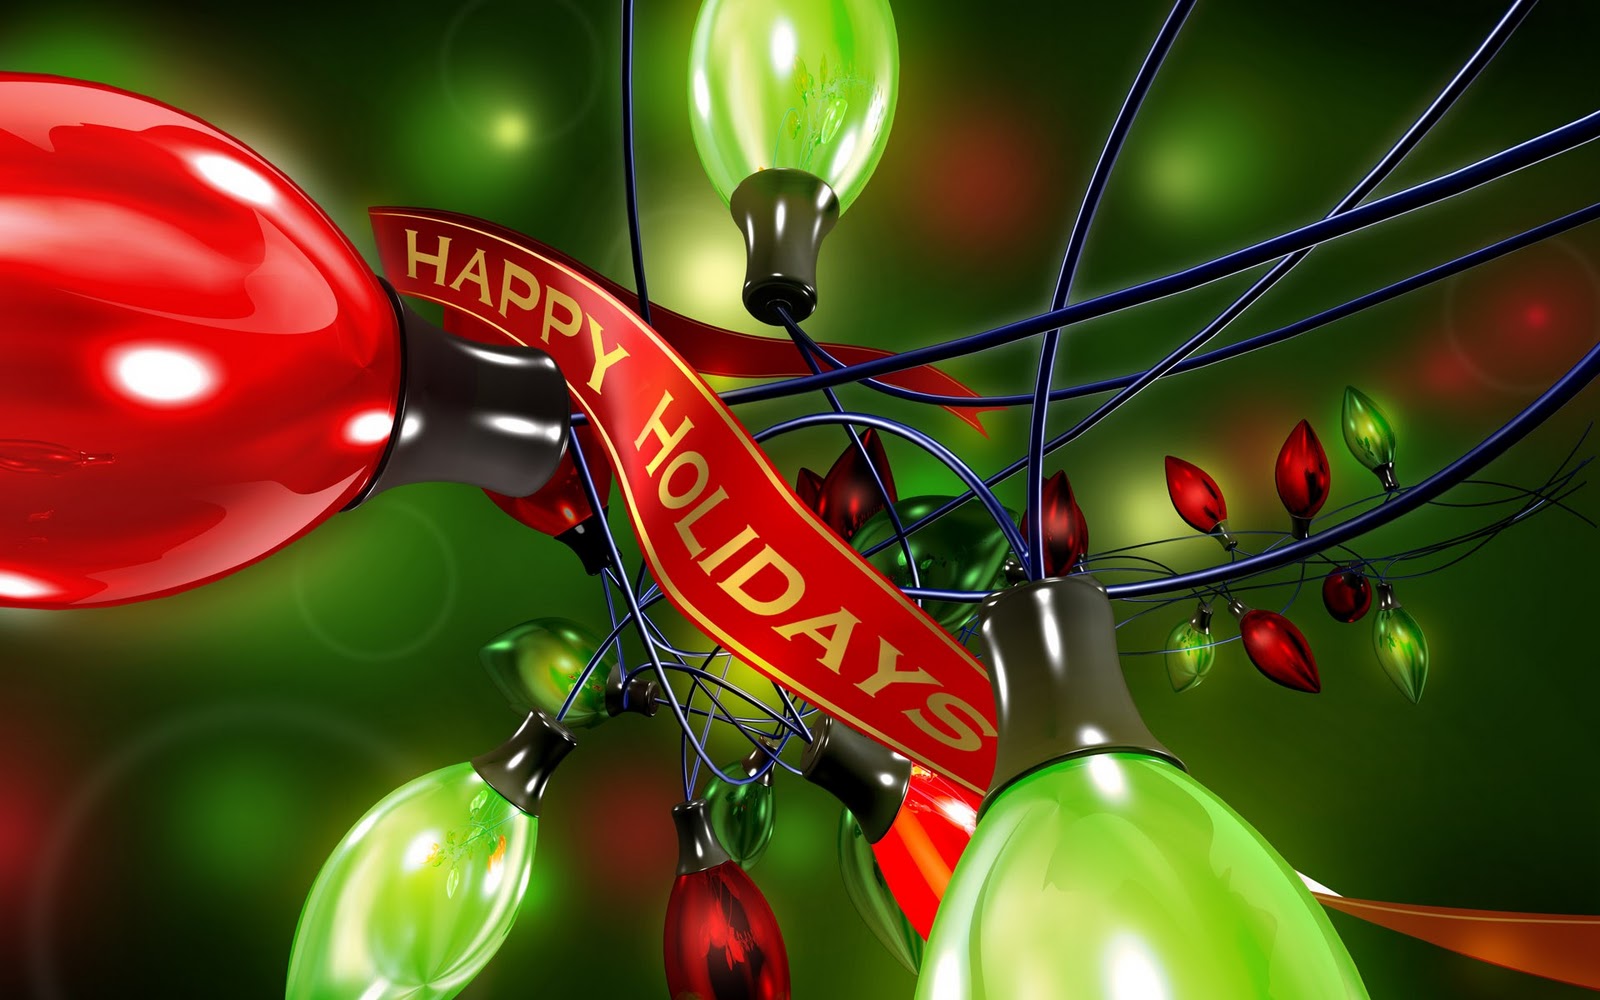 Happy Holidays Free PPT Backgrounds For Your PowerPoint Templates